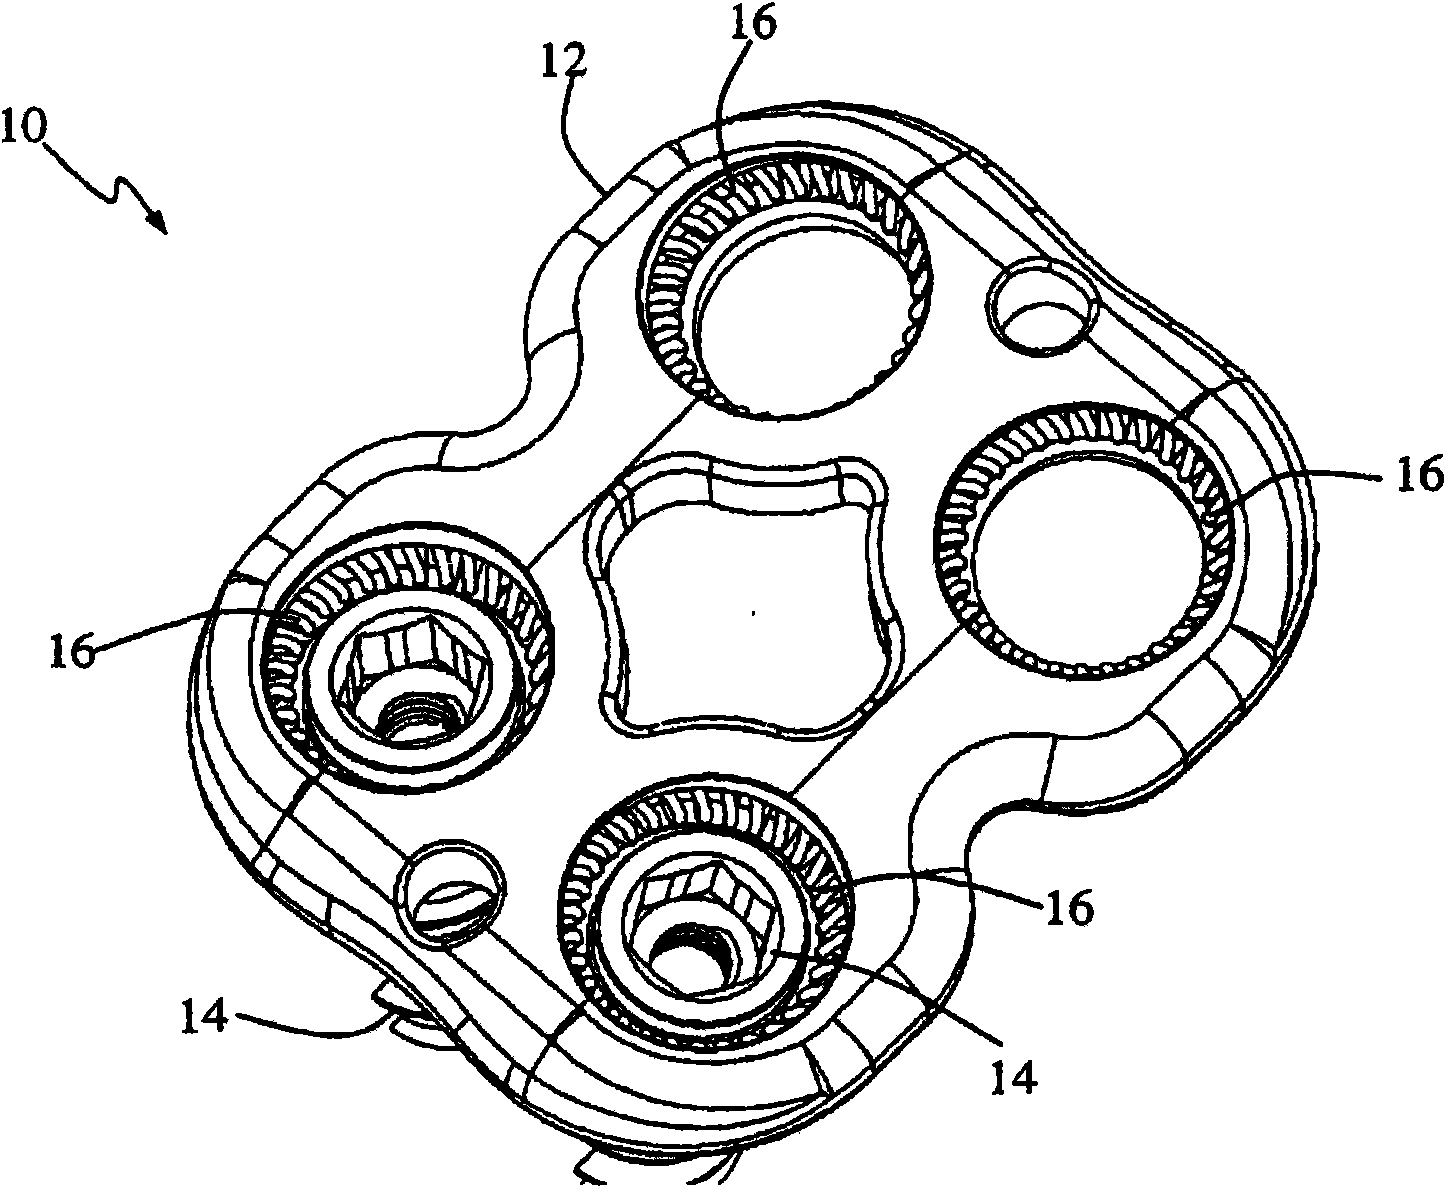 Surgical fixation system and related methods